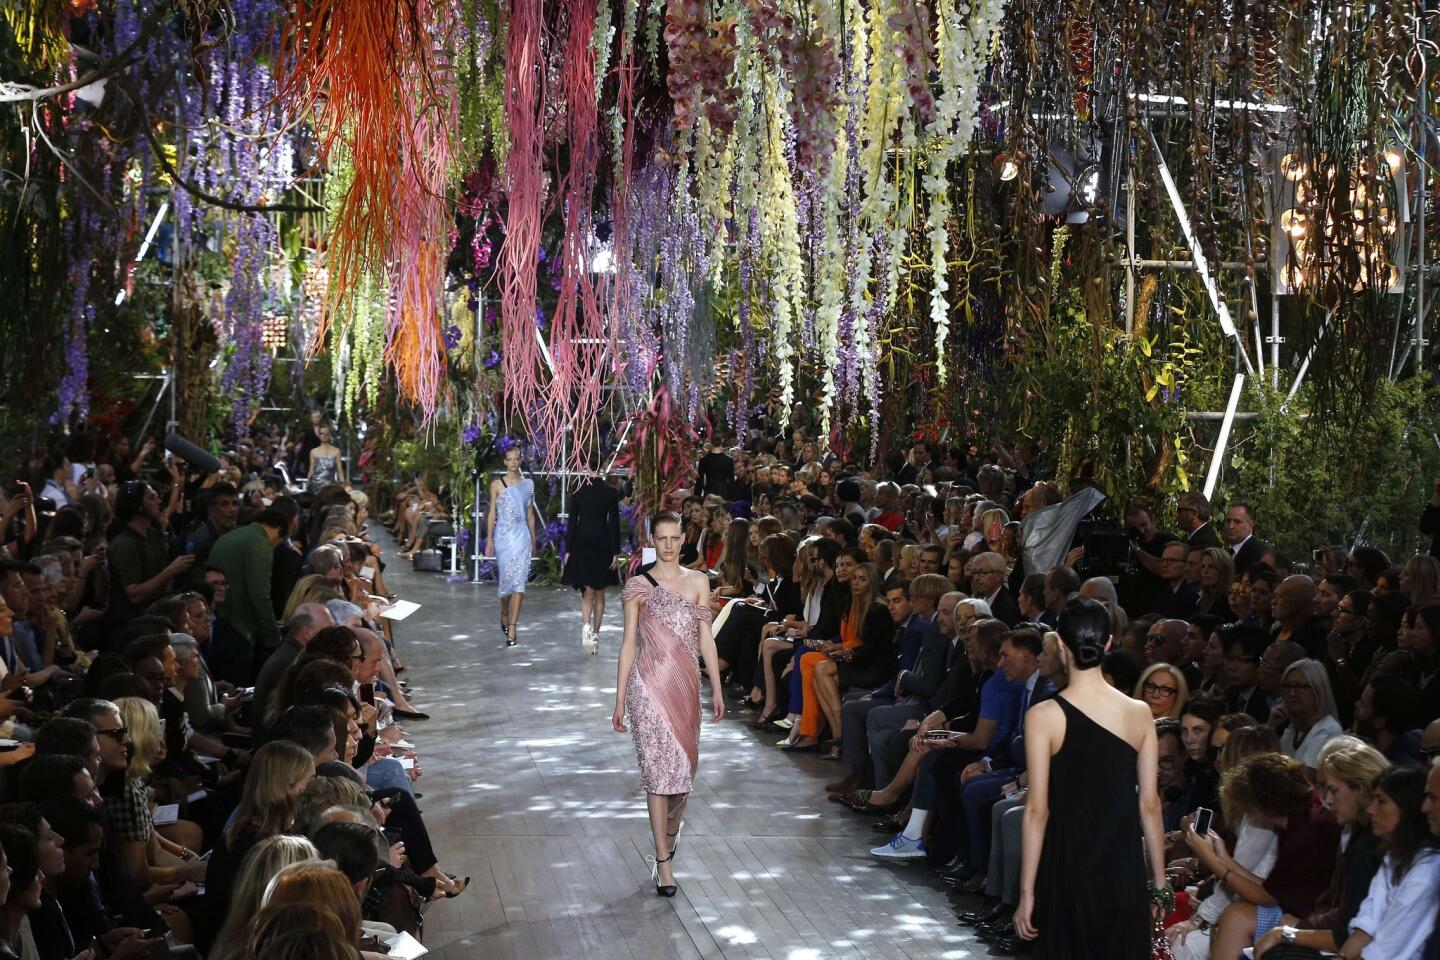 Christian Dior Spring 2013 Couture: 5 Style Lessons From Today's Paris Show